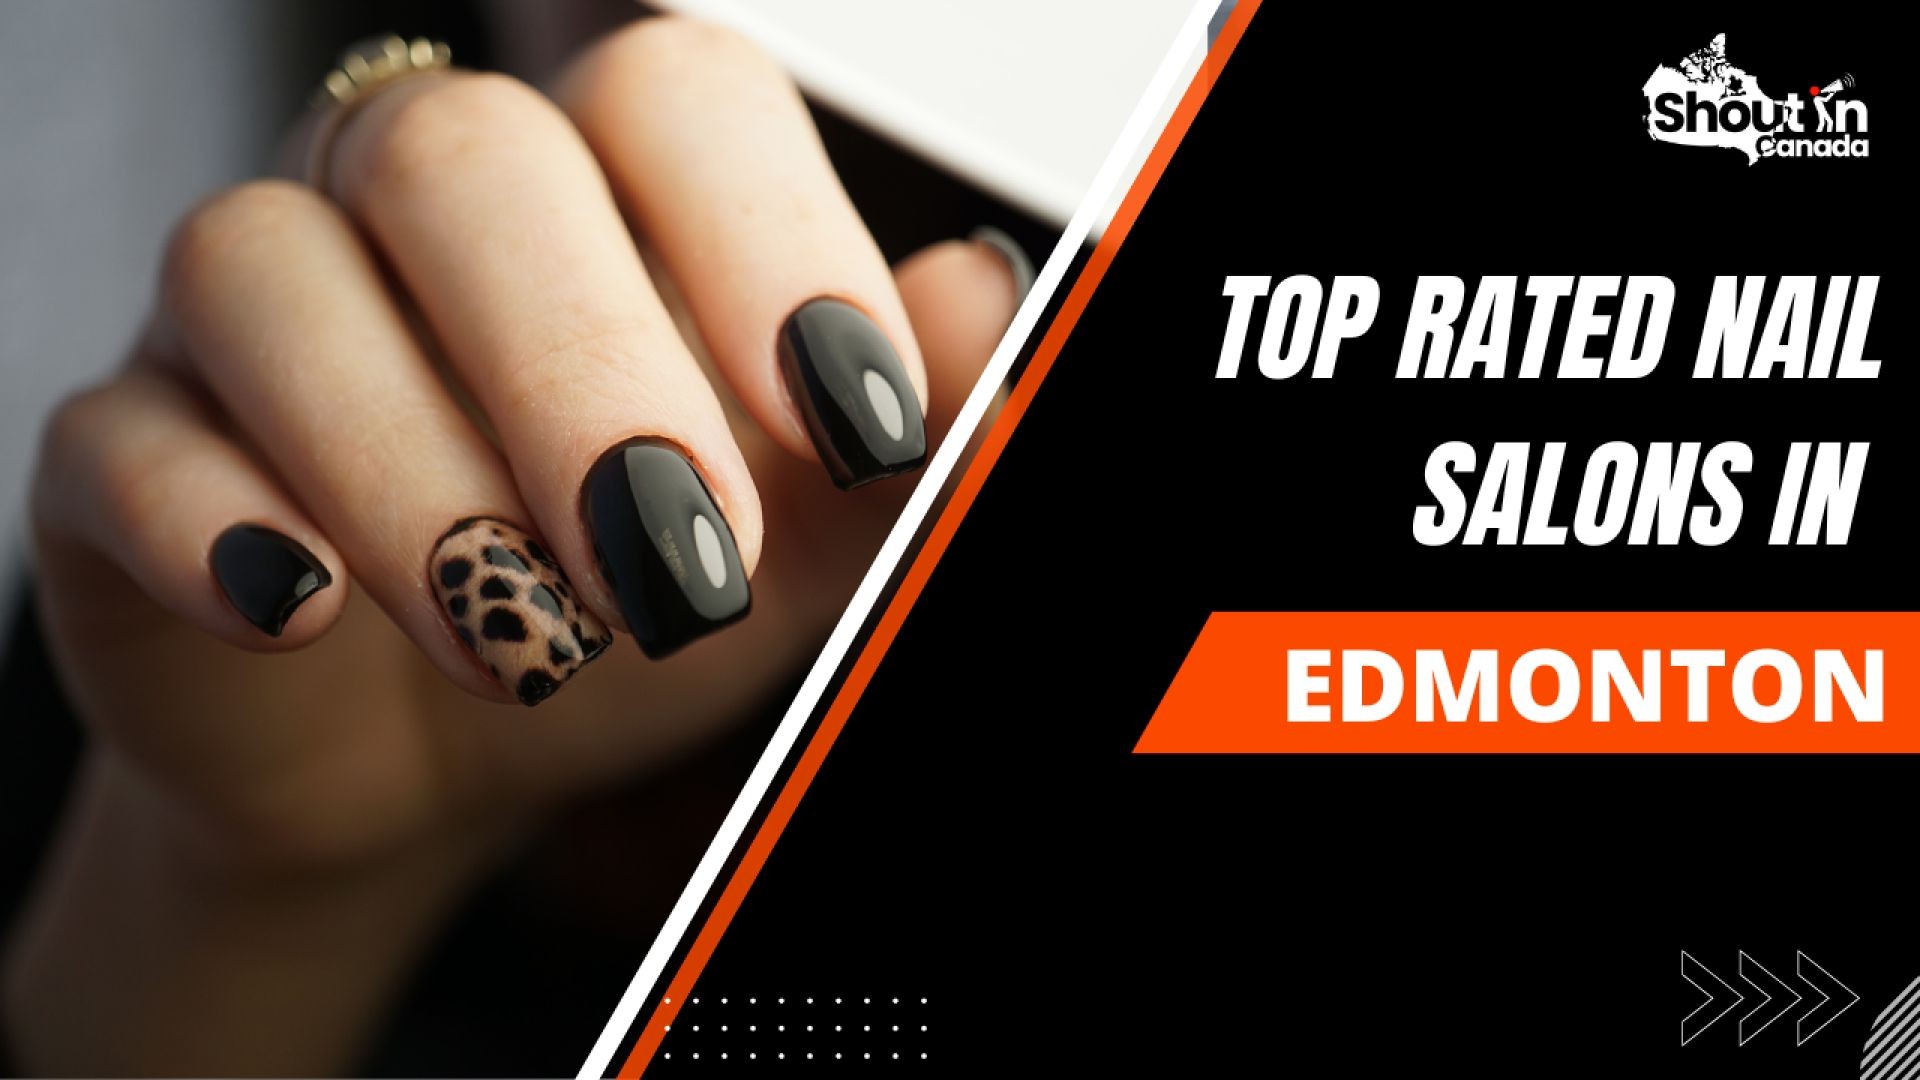 Top Rated Nail Salons In Edmonton | Shout In Canada